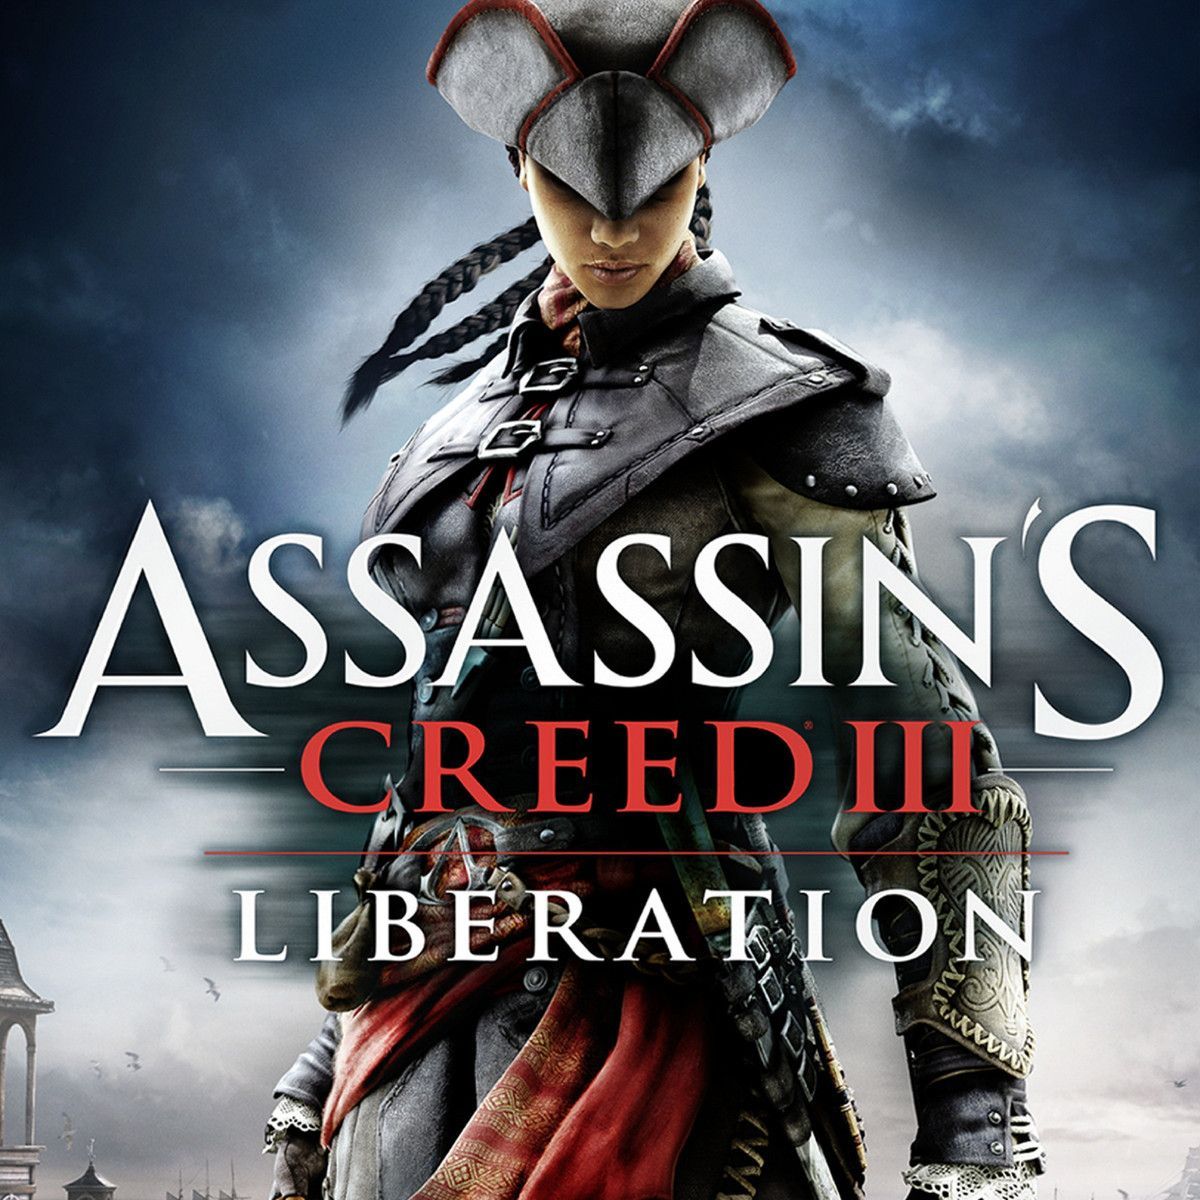 1200x1200 > Assassin's Creed III: Liberation Wallpapers